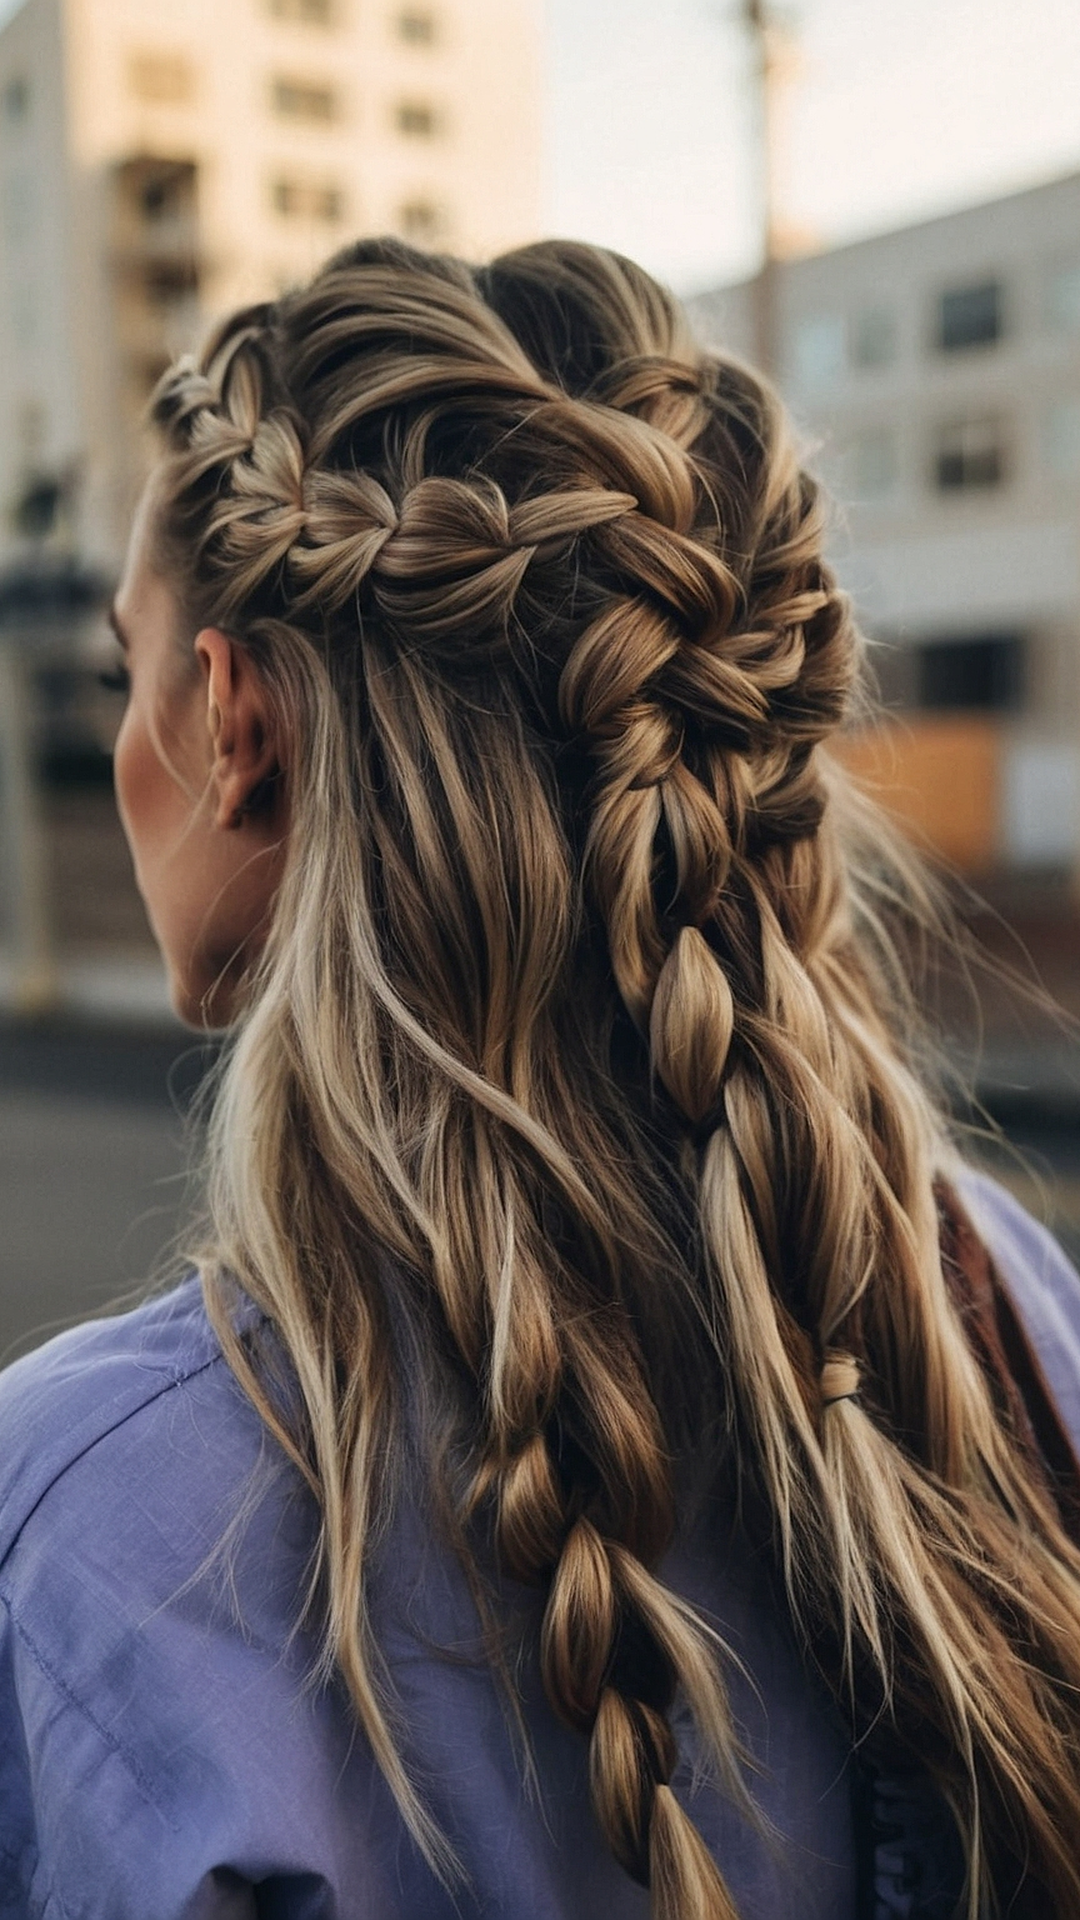 Exquisite Twists: Sophisticated Braided Styles